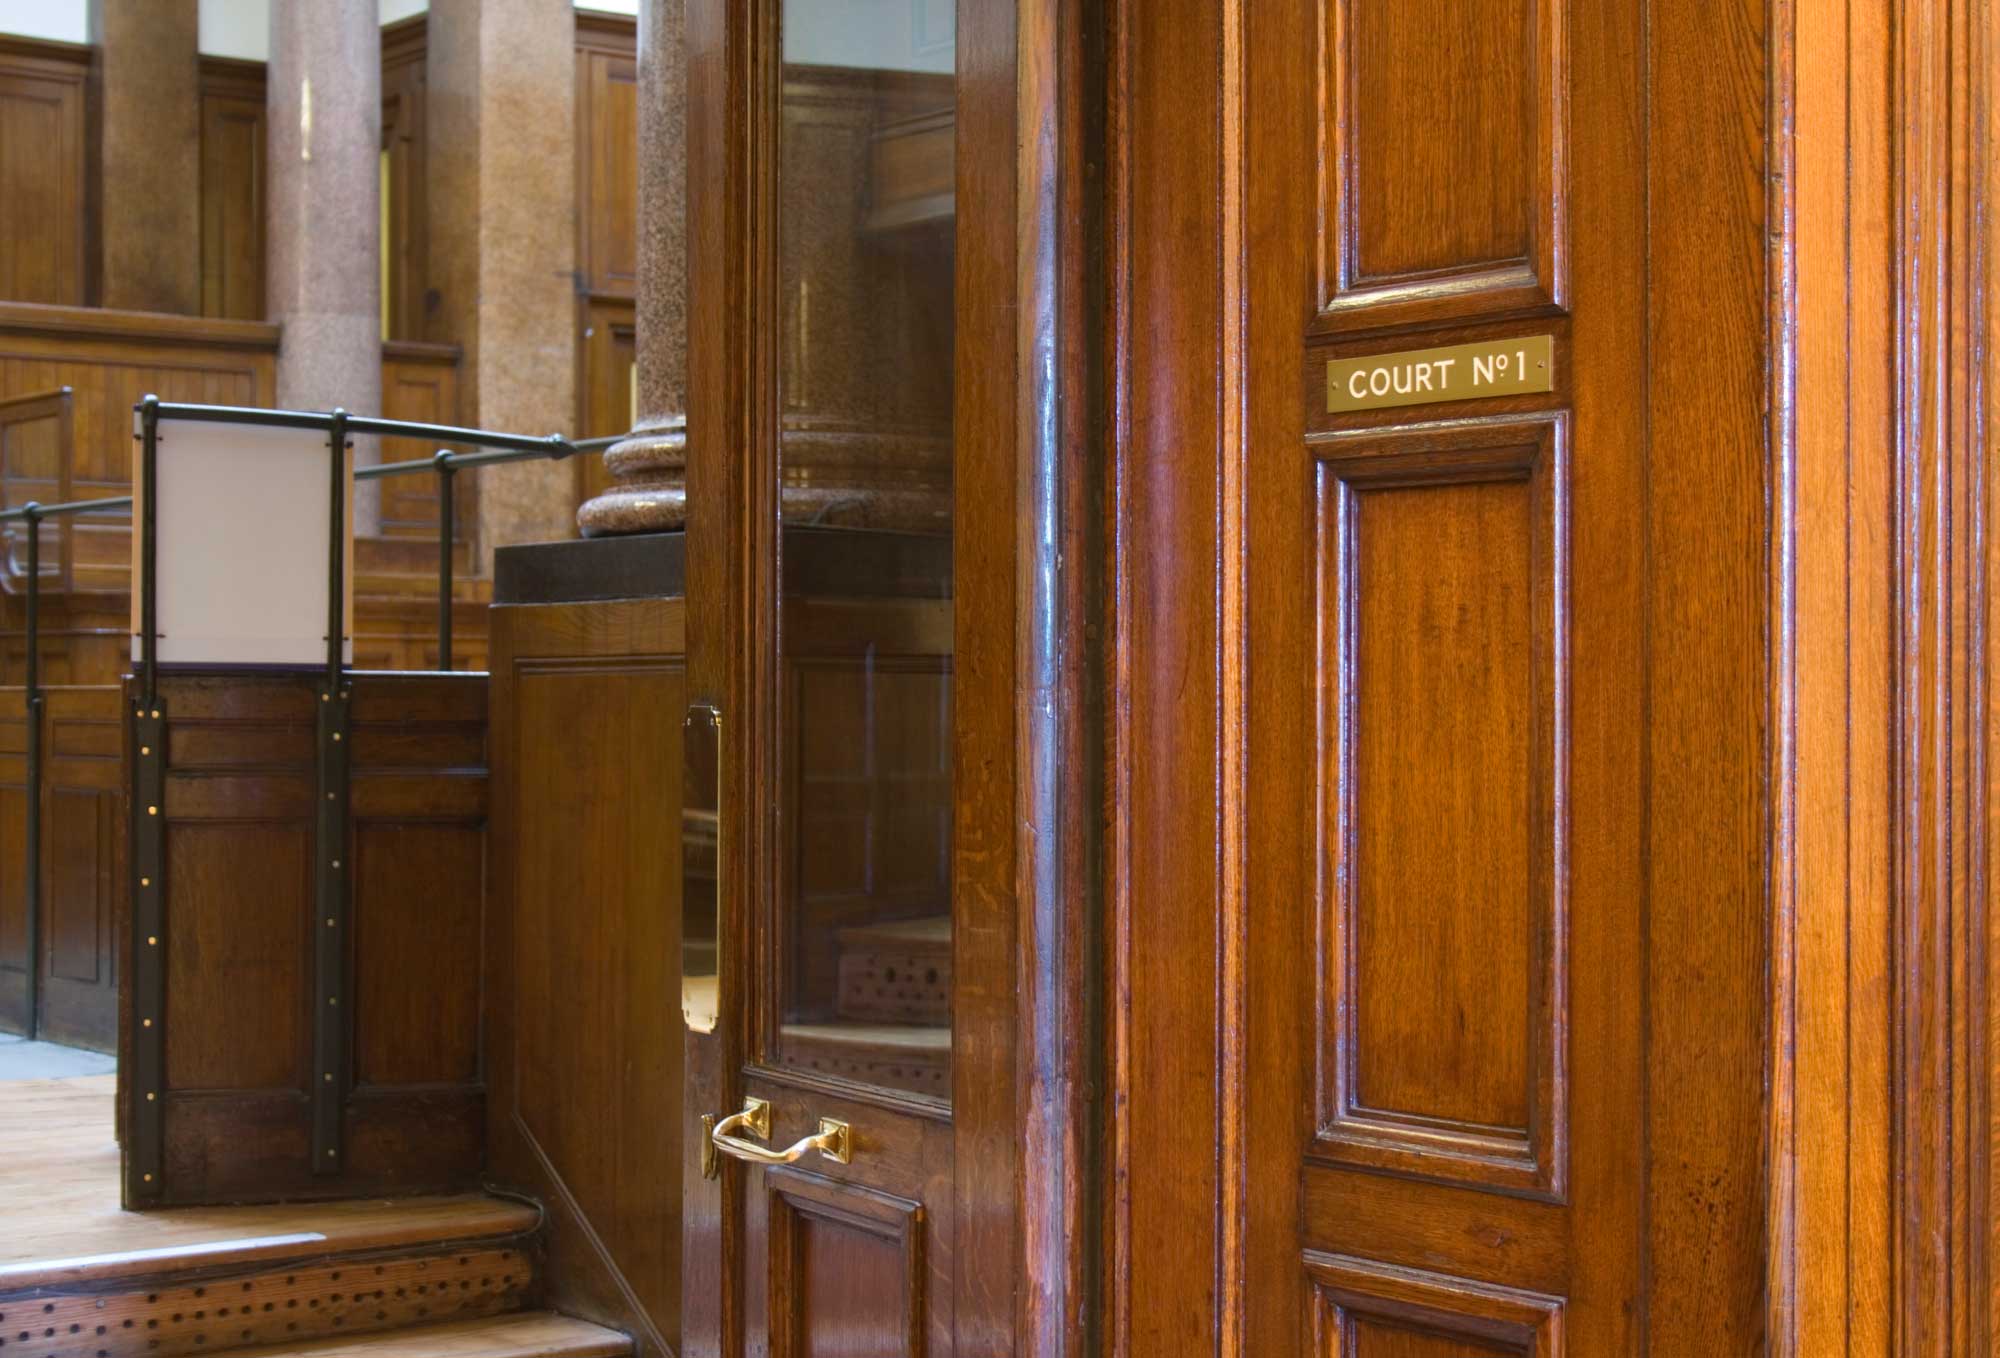 Image of entrance to Court No. 1 with heavy wood paneling and glass paned doors.